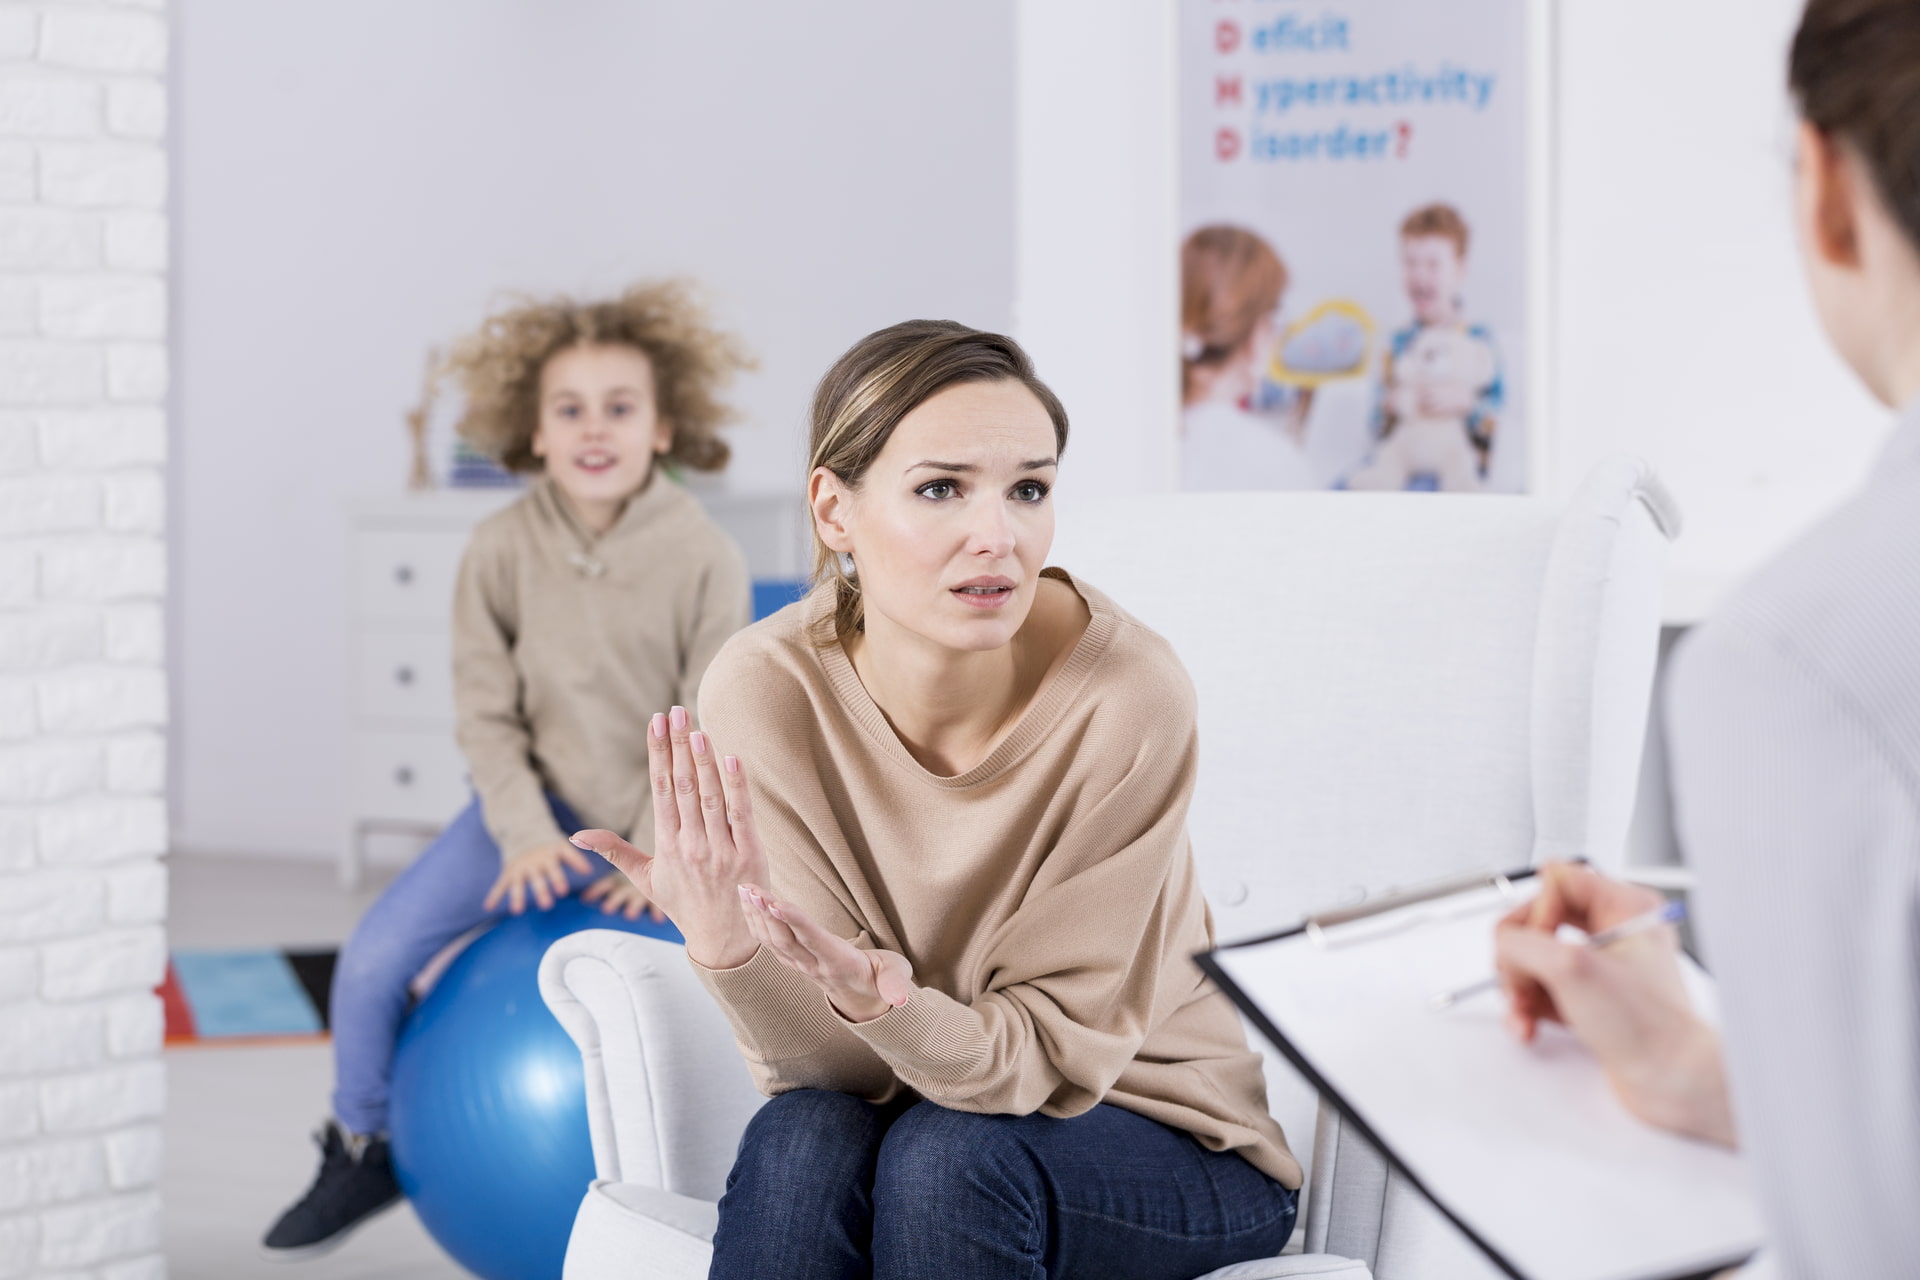 ADHD requires medical treatment, and when parents or individuals don't treat it, they can experience serious consequences.